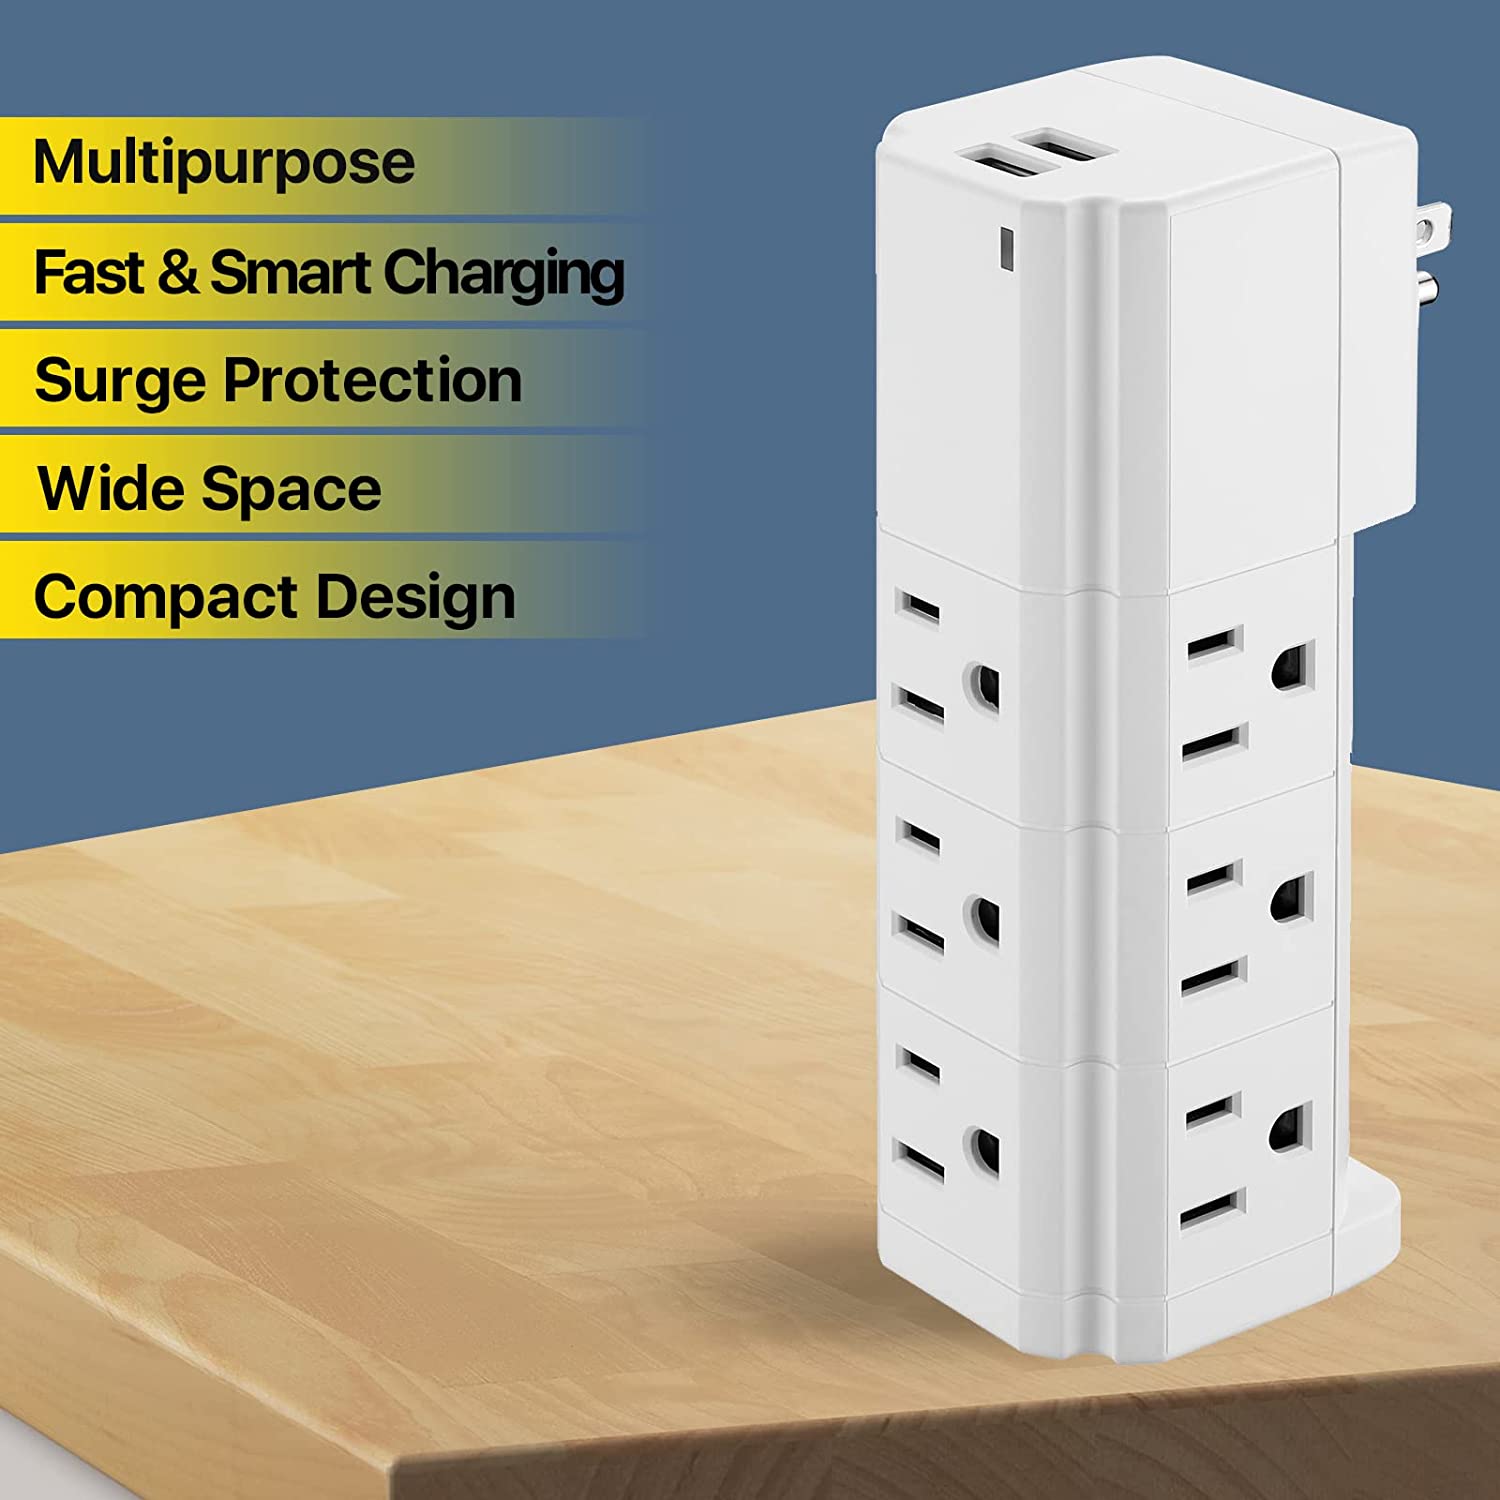 Multi-Plug Surge Protector Wall Adapter - 9 Outlets & 2 USB Ports